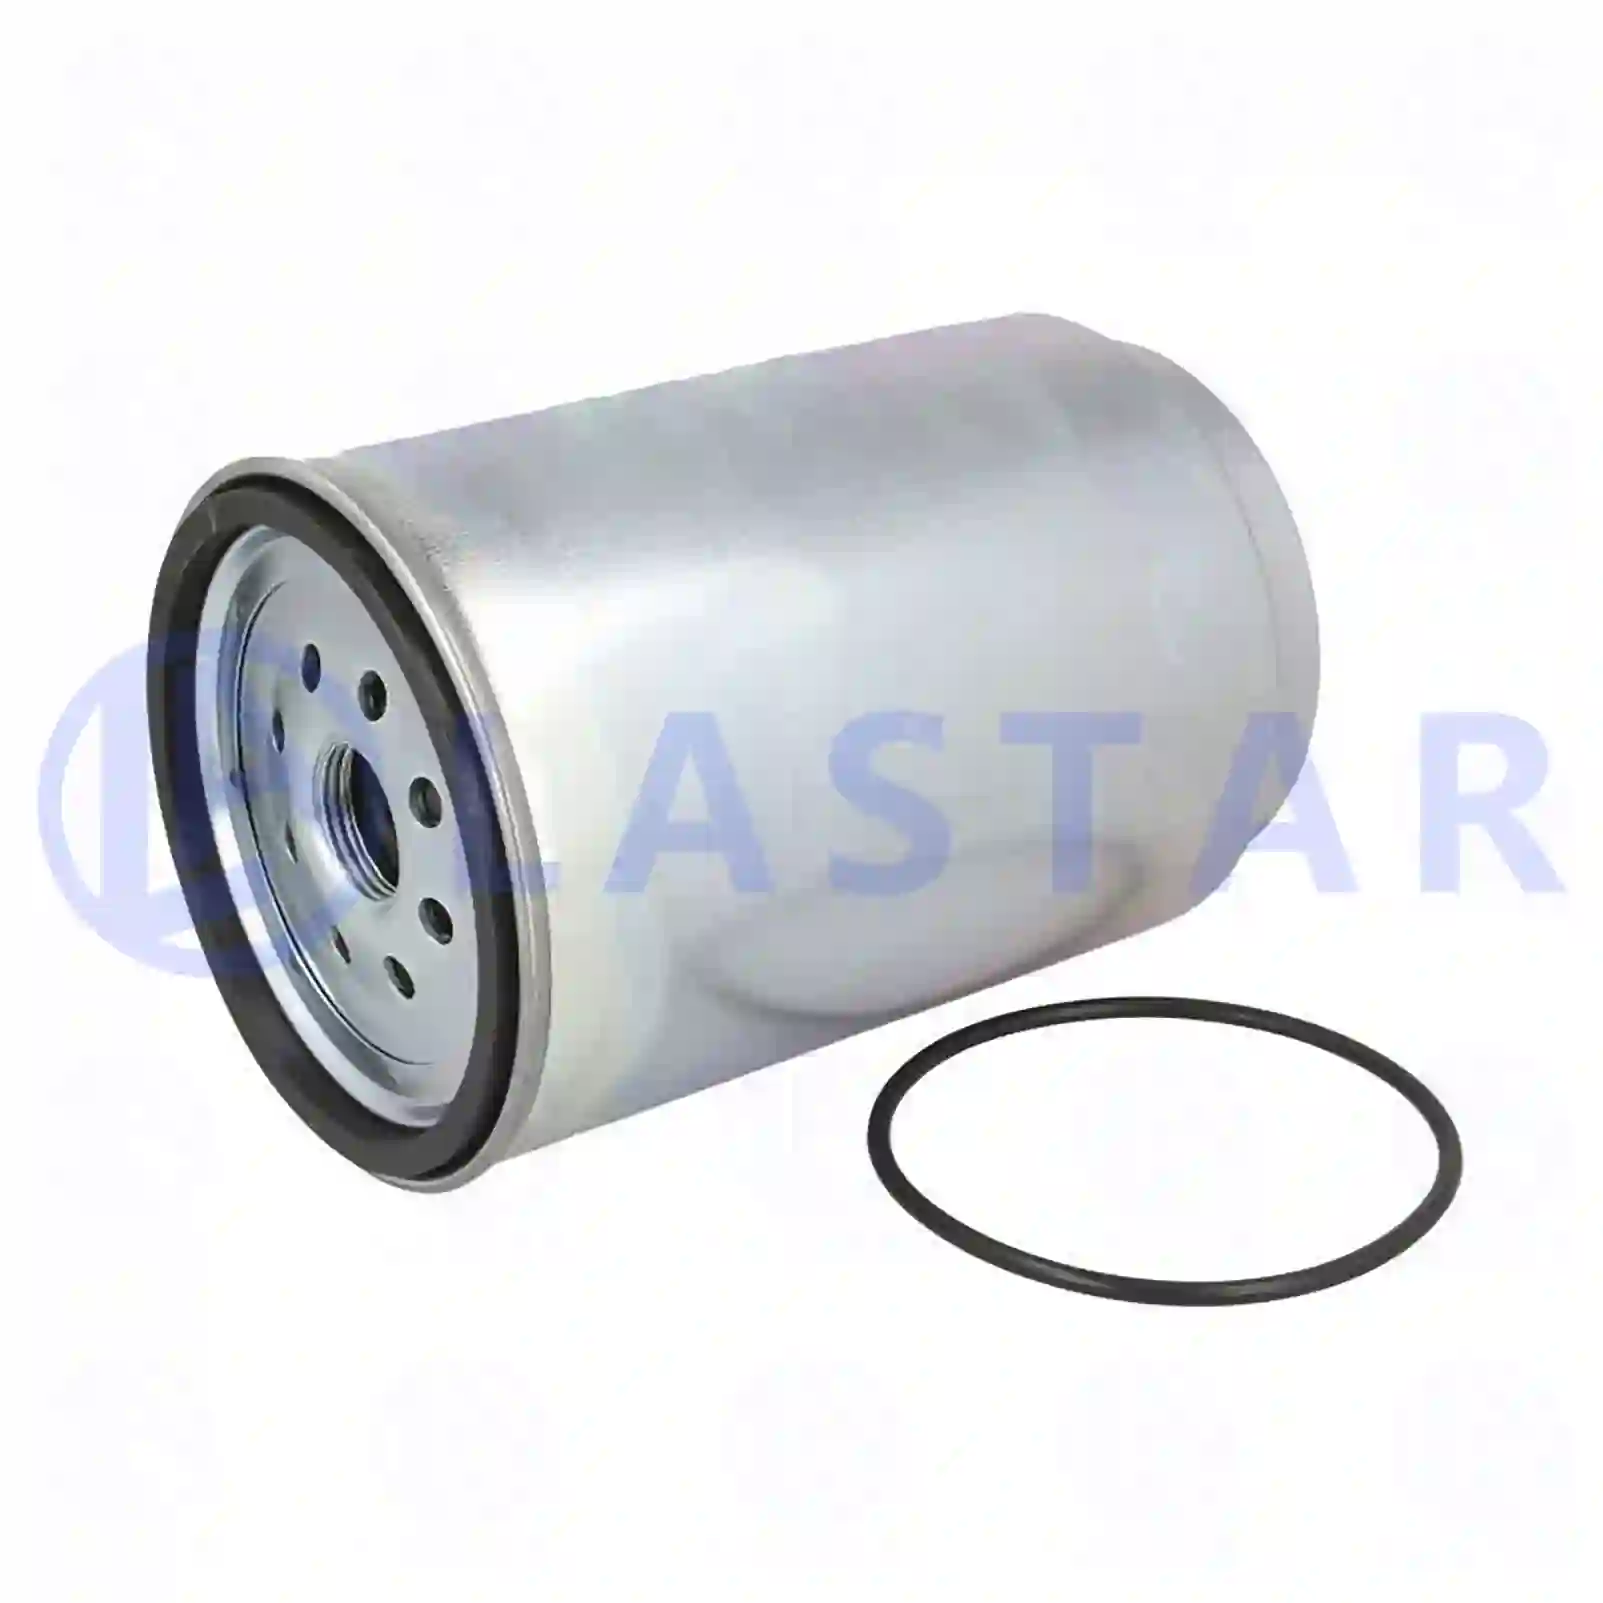 Fuel filter, water separator, 77723954, 1526297, 1533870, 1535381, 20539578, 21041613, 21380524, 21380526, 5001868493, 7420745605, 7420998349, 7421380483, 20745605, 20788794, 20869725, 20879812, 20998349, 21017307, 21041613, 21366596, 21380483, 21380488, ZG10156-0008 ||  77723954 Lastar Spare Part | Truck Spare Parts, Auotomotive Spare Parts Fuel filter, water separator, 77723954, 1526297, 1533870, 1535381, 20539578, 21041613, 21380524, 21380526, 5001868493, 7420745605, 7420998349, 7421380483, 20745605, 20788794, 20869725, 20879812, 20998349, 21017307, 21041613, 21366596, 21380483, 21380488, ZG10156-0008 ||  77723954 Lastar Spare Part | Truck Spare Parts, Auotomotive Spare Parts